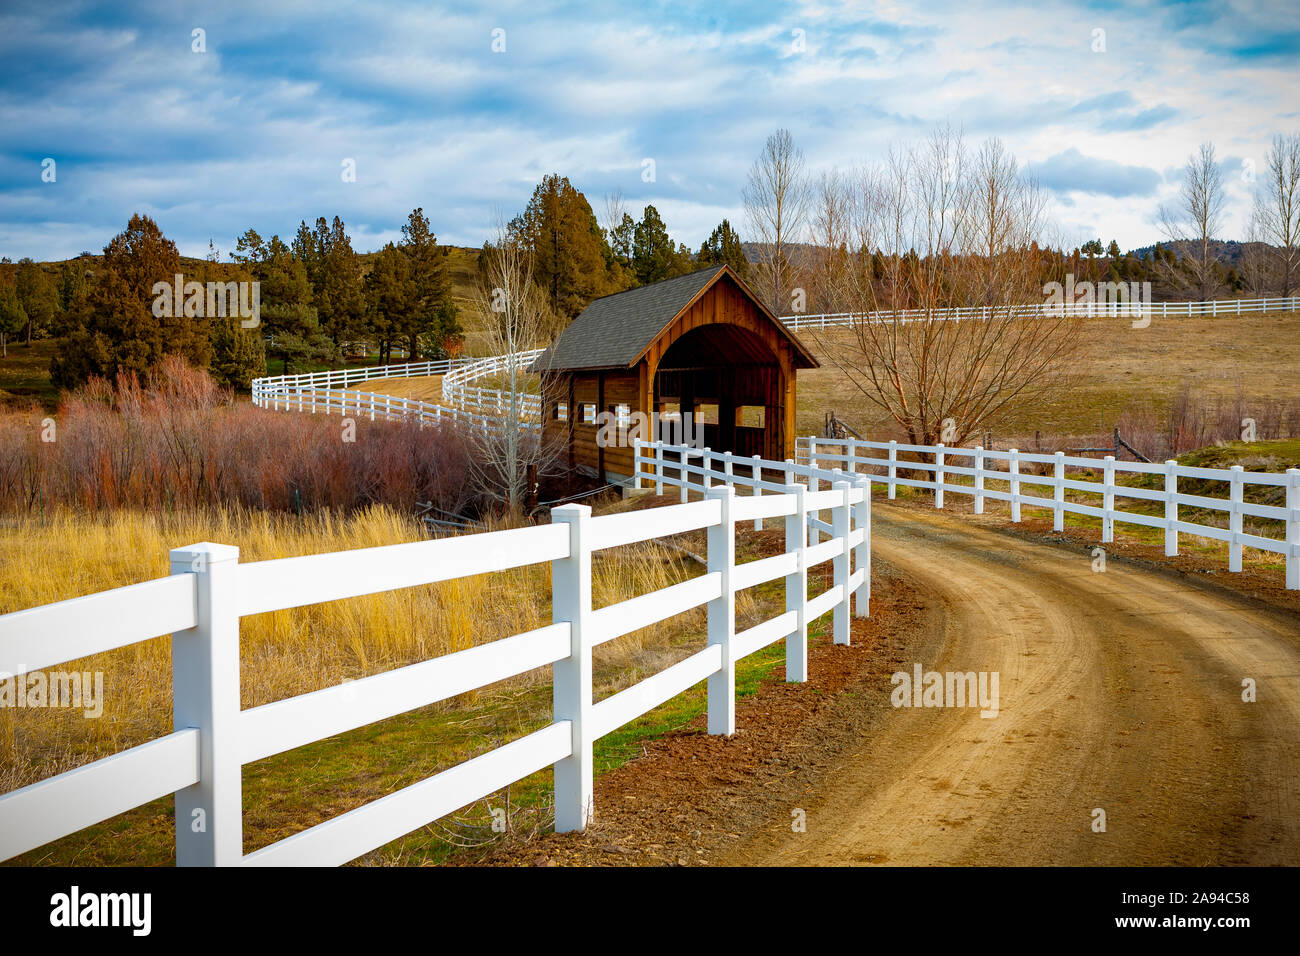 Covered bridge over a river in the countryside with dirt road; Oregon, United States of America Stock Photo